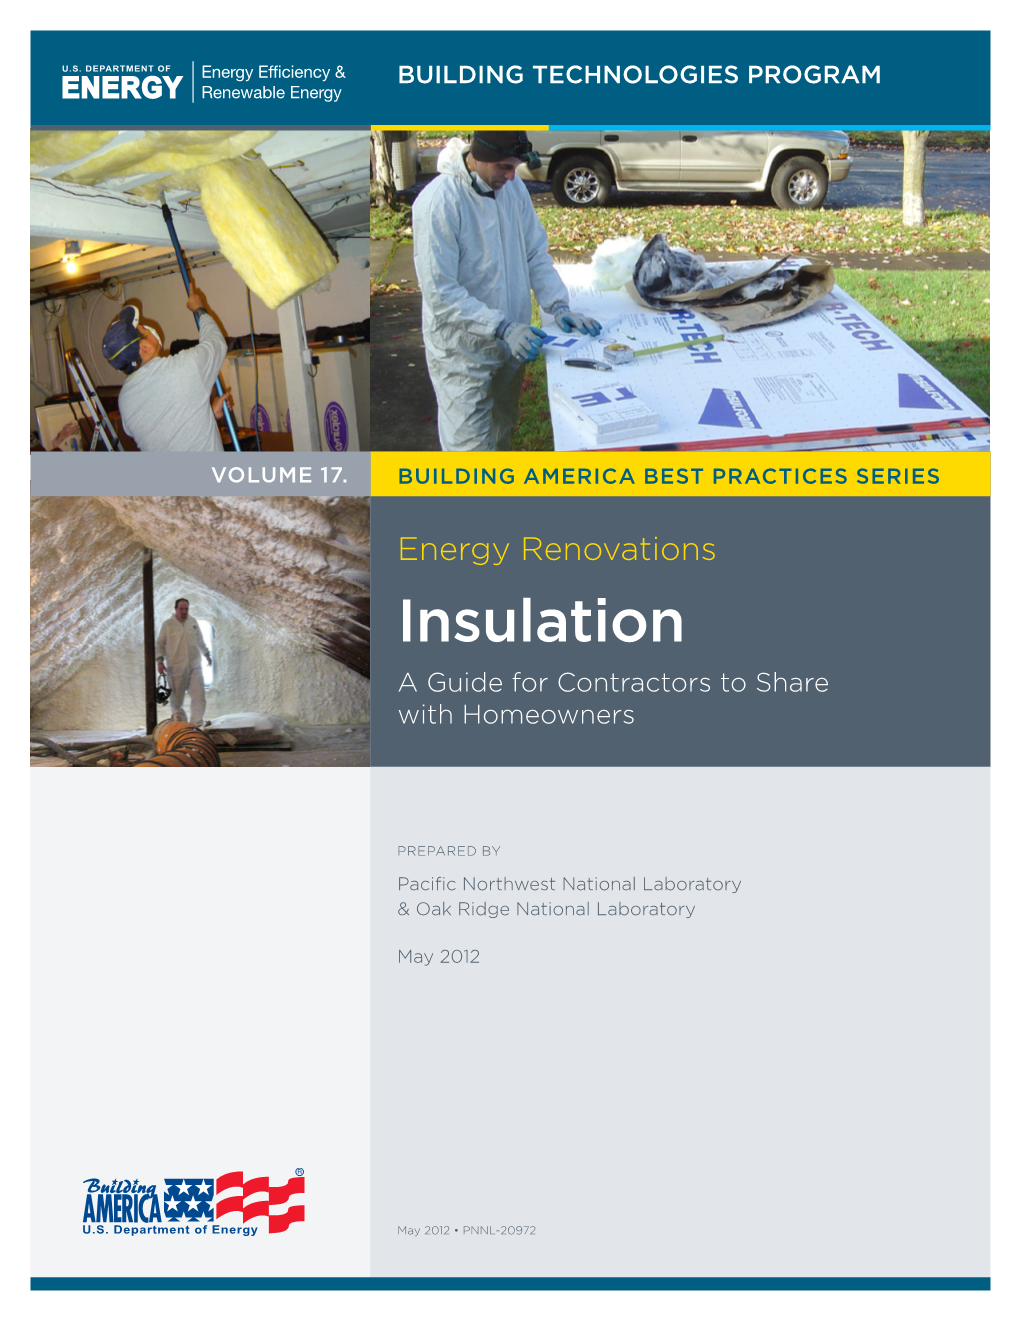 Insulation a Guide for Contractors to Share with Homeowners